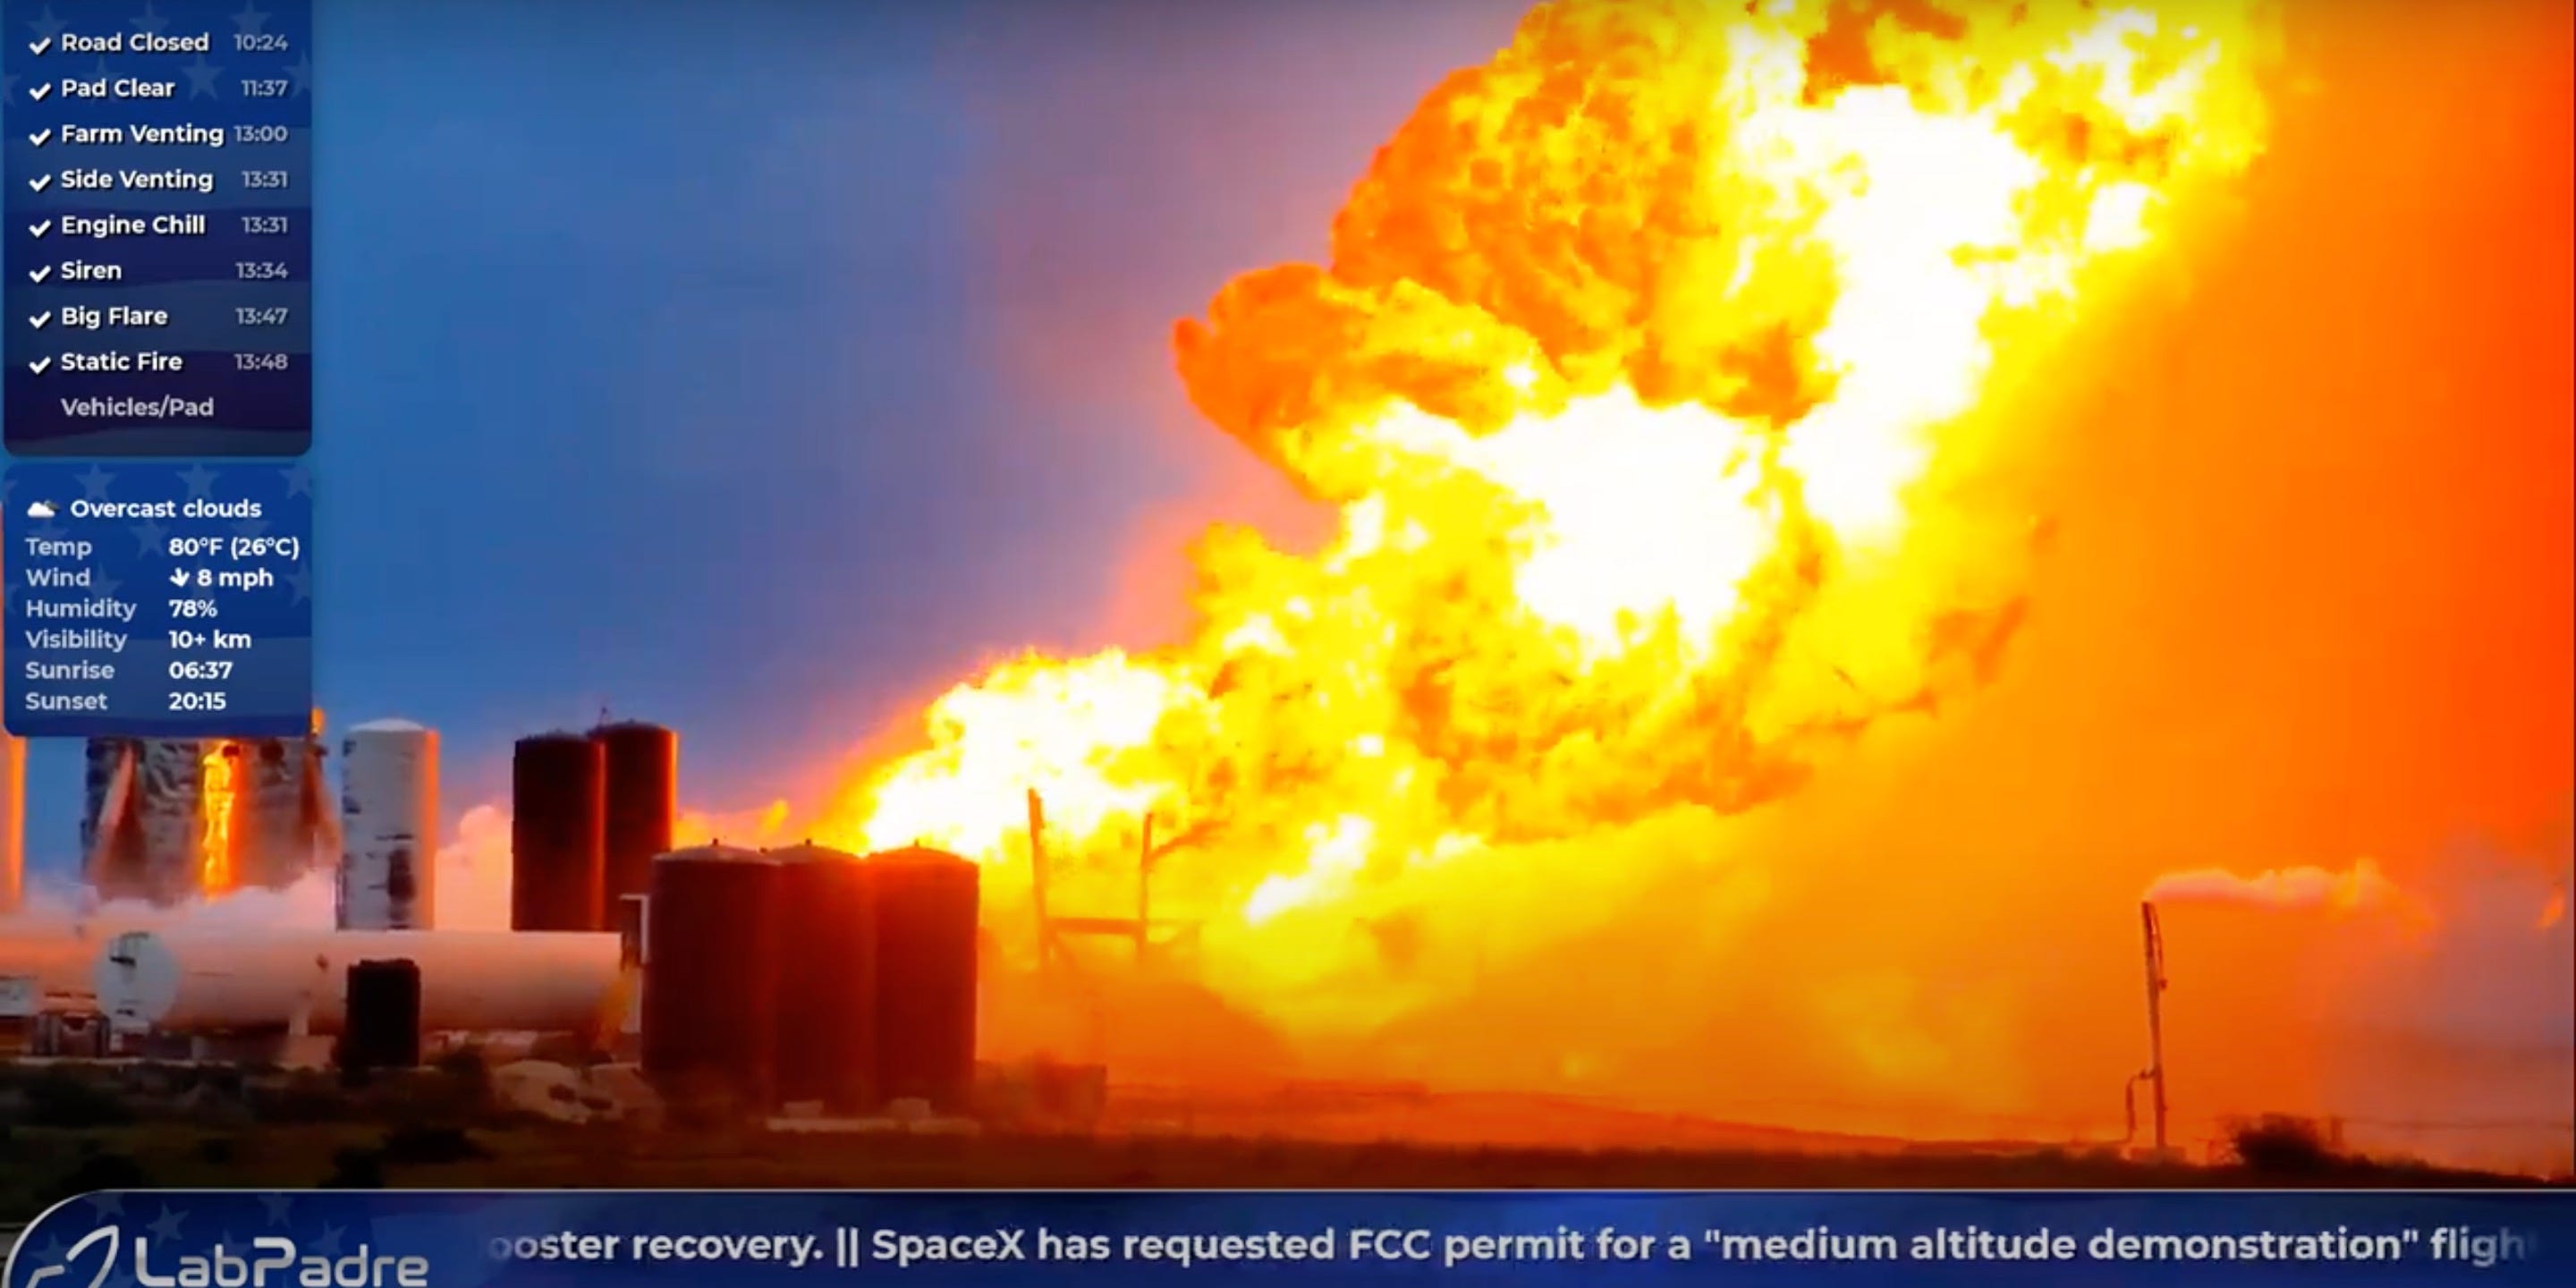 SpaceX’s latest Starship rocket prototype just exploded during an engine test